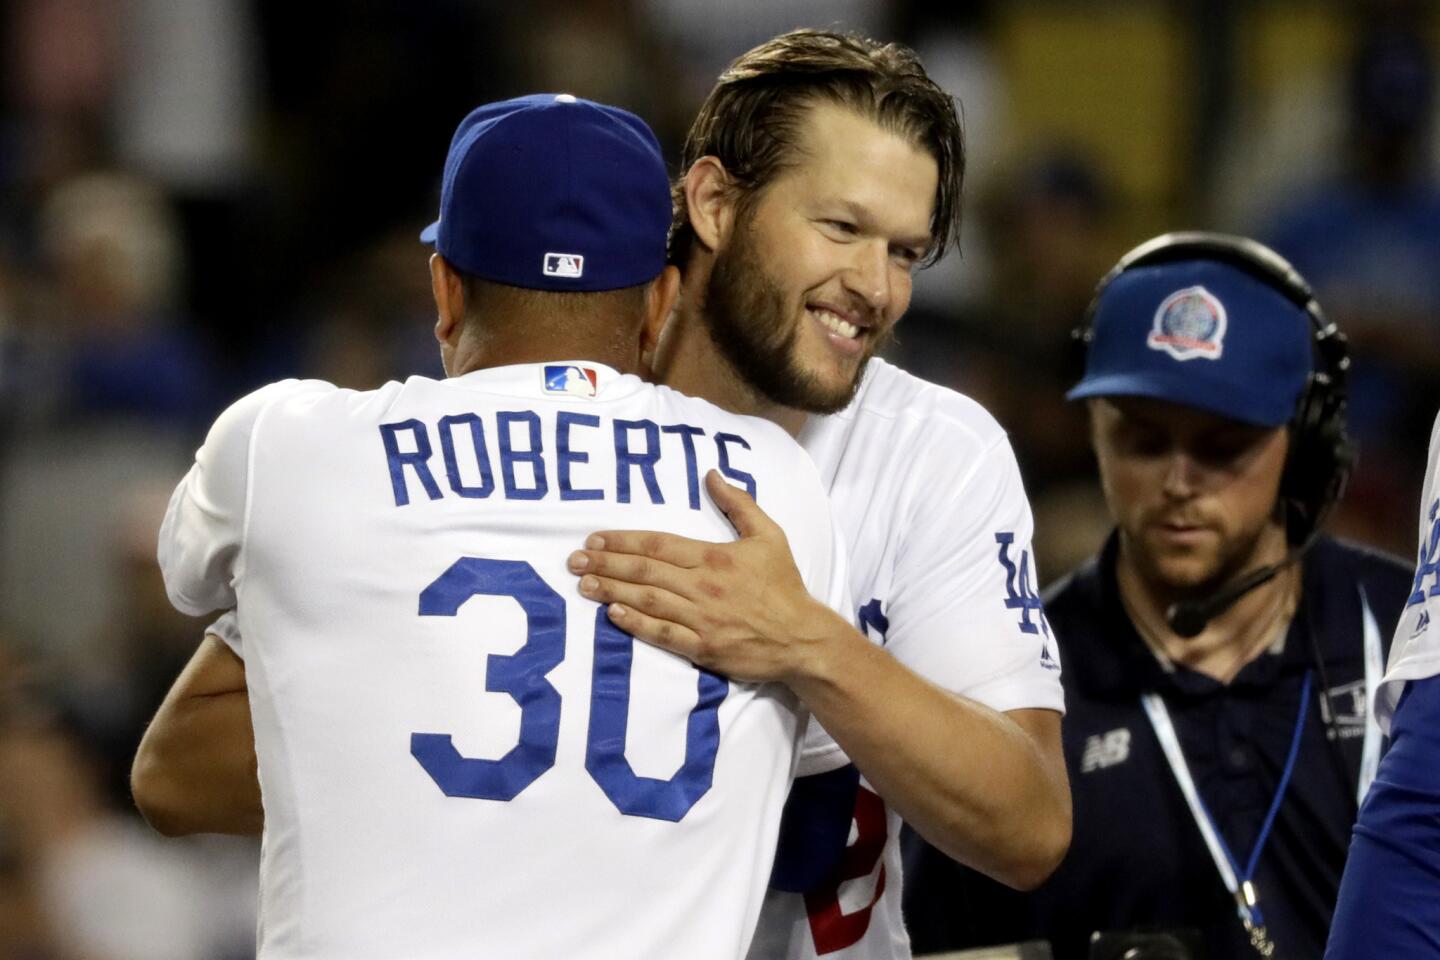 Clayton Kershaw embraces Dodgers manager Dave Roberts after pitching eight shutout innings in 3-0 win over the Braves in Game 2 of their 2018 NLDS series.